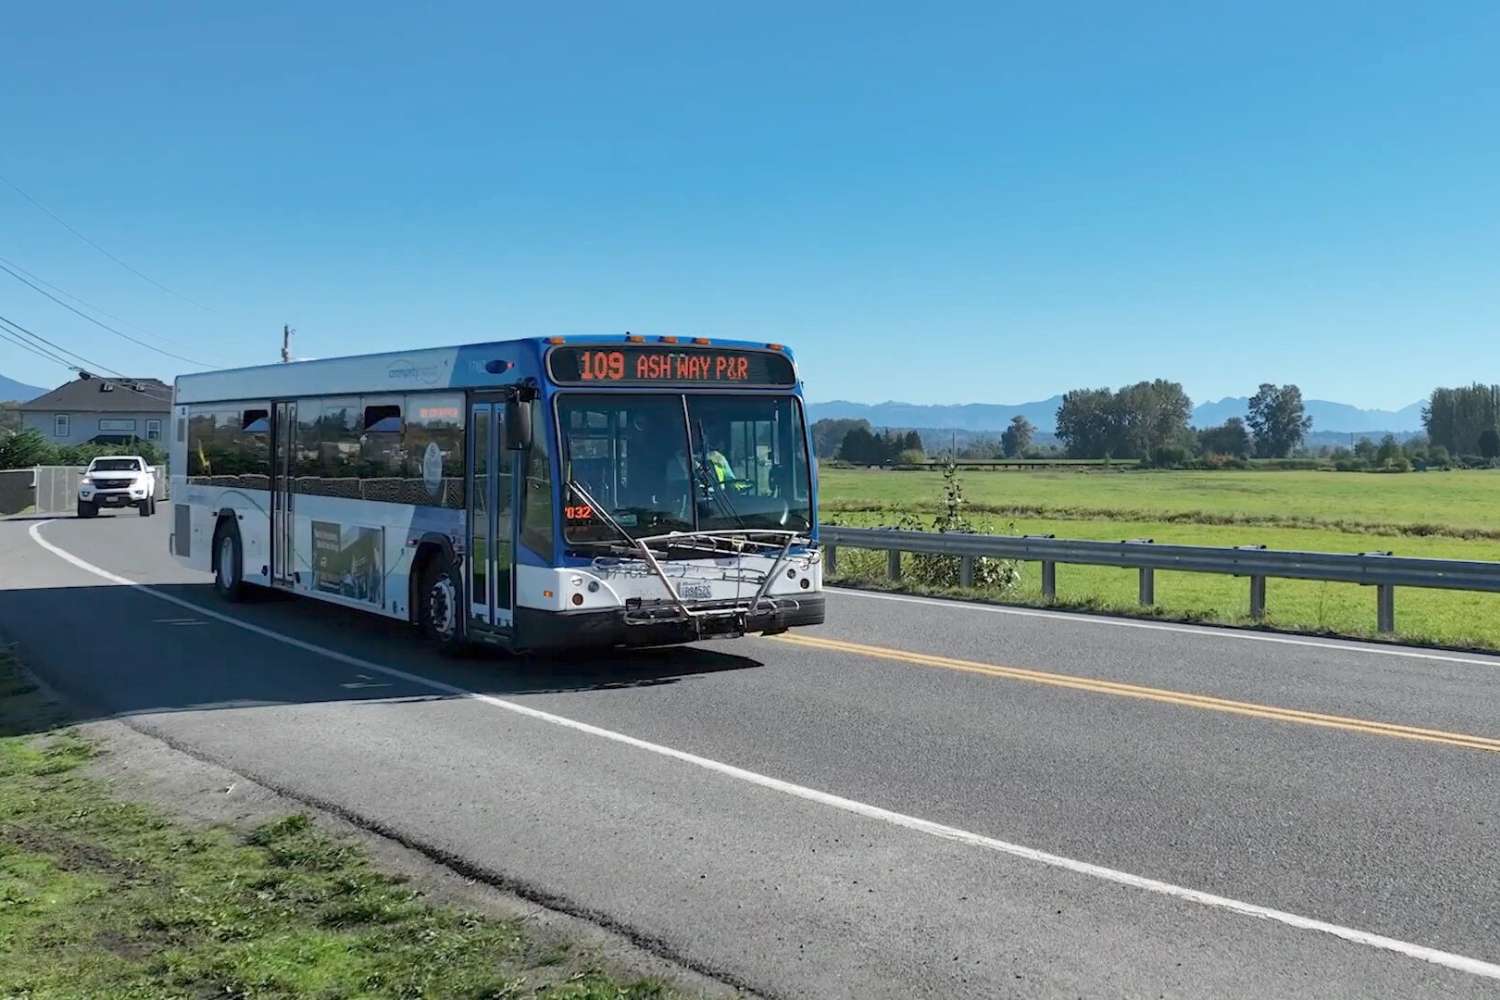 A Community Transit bus serves Route 109 to Ash Way Park and Ride